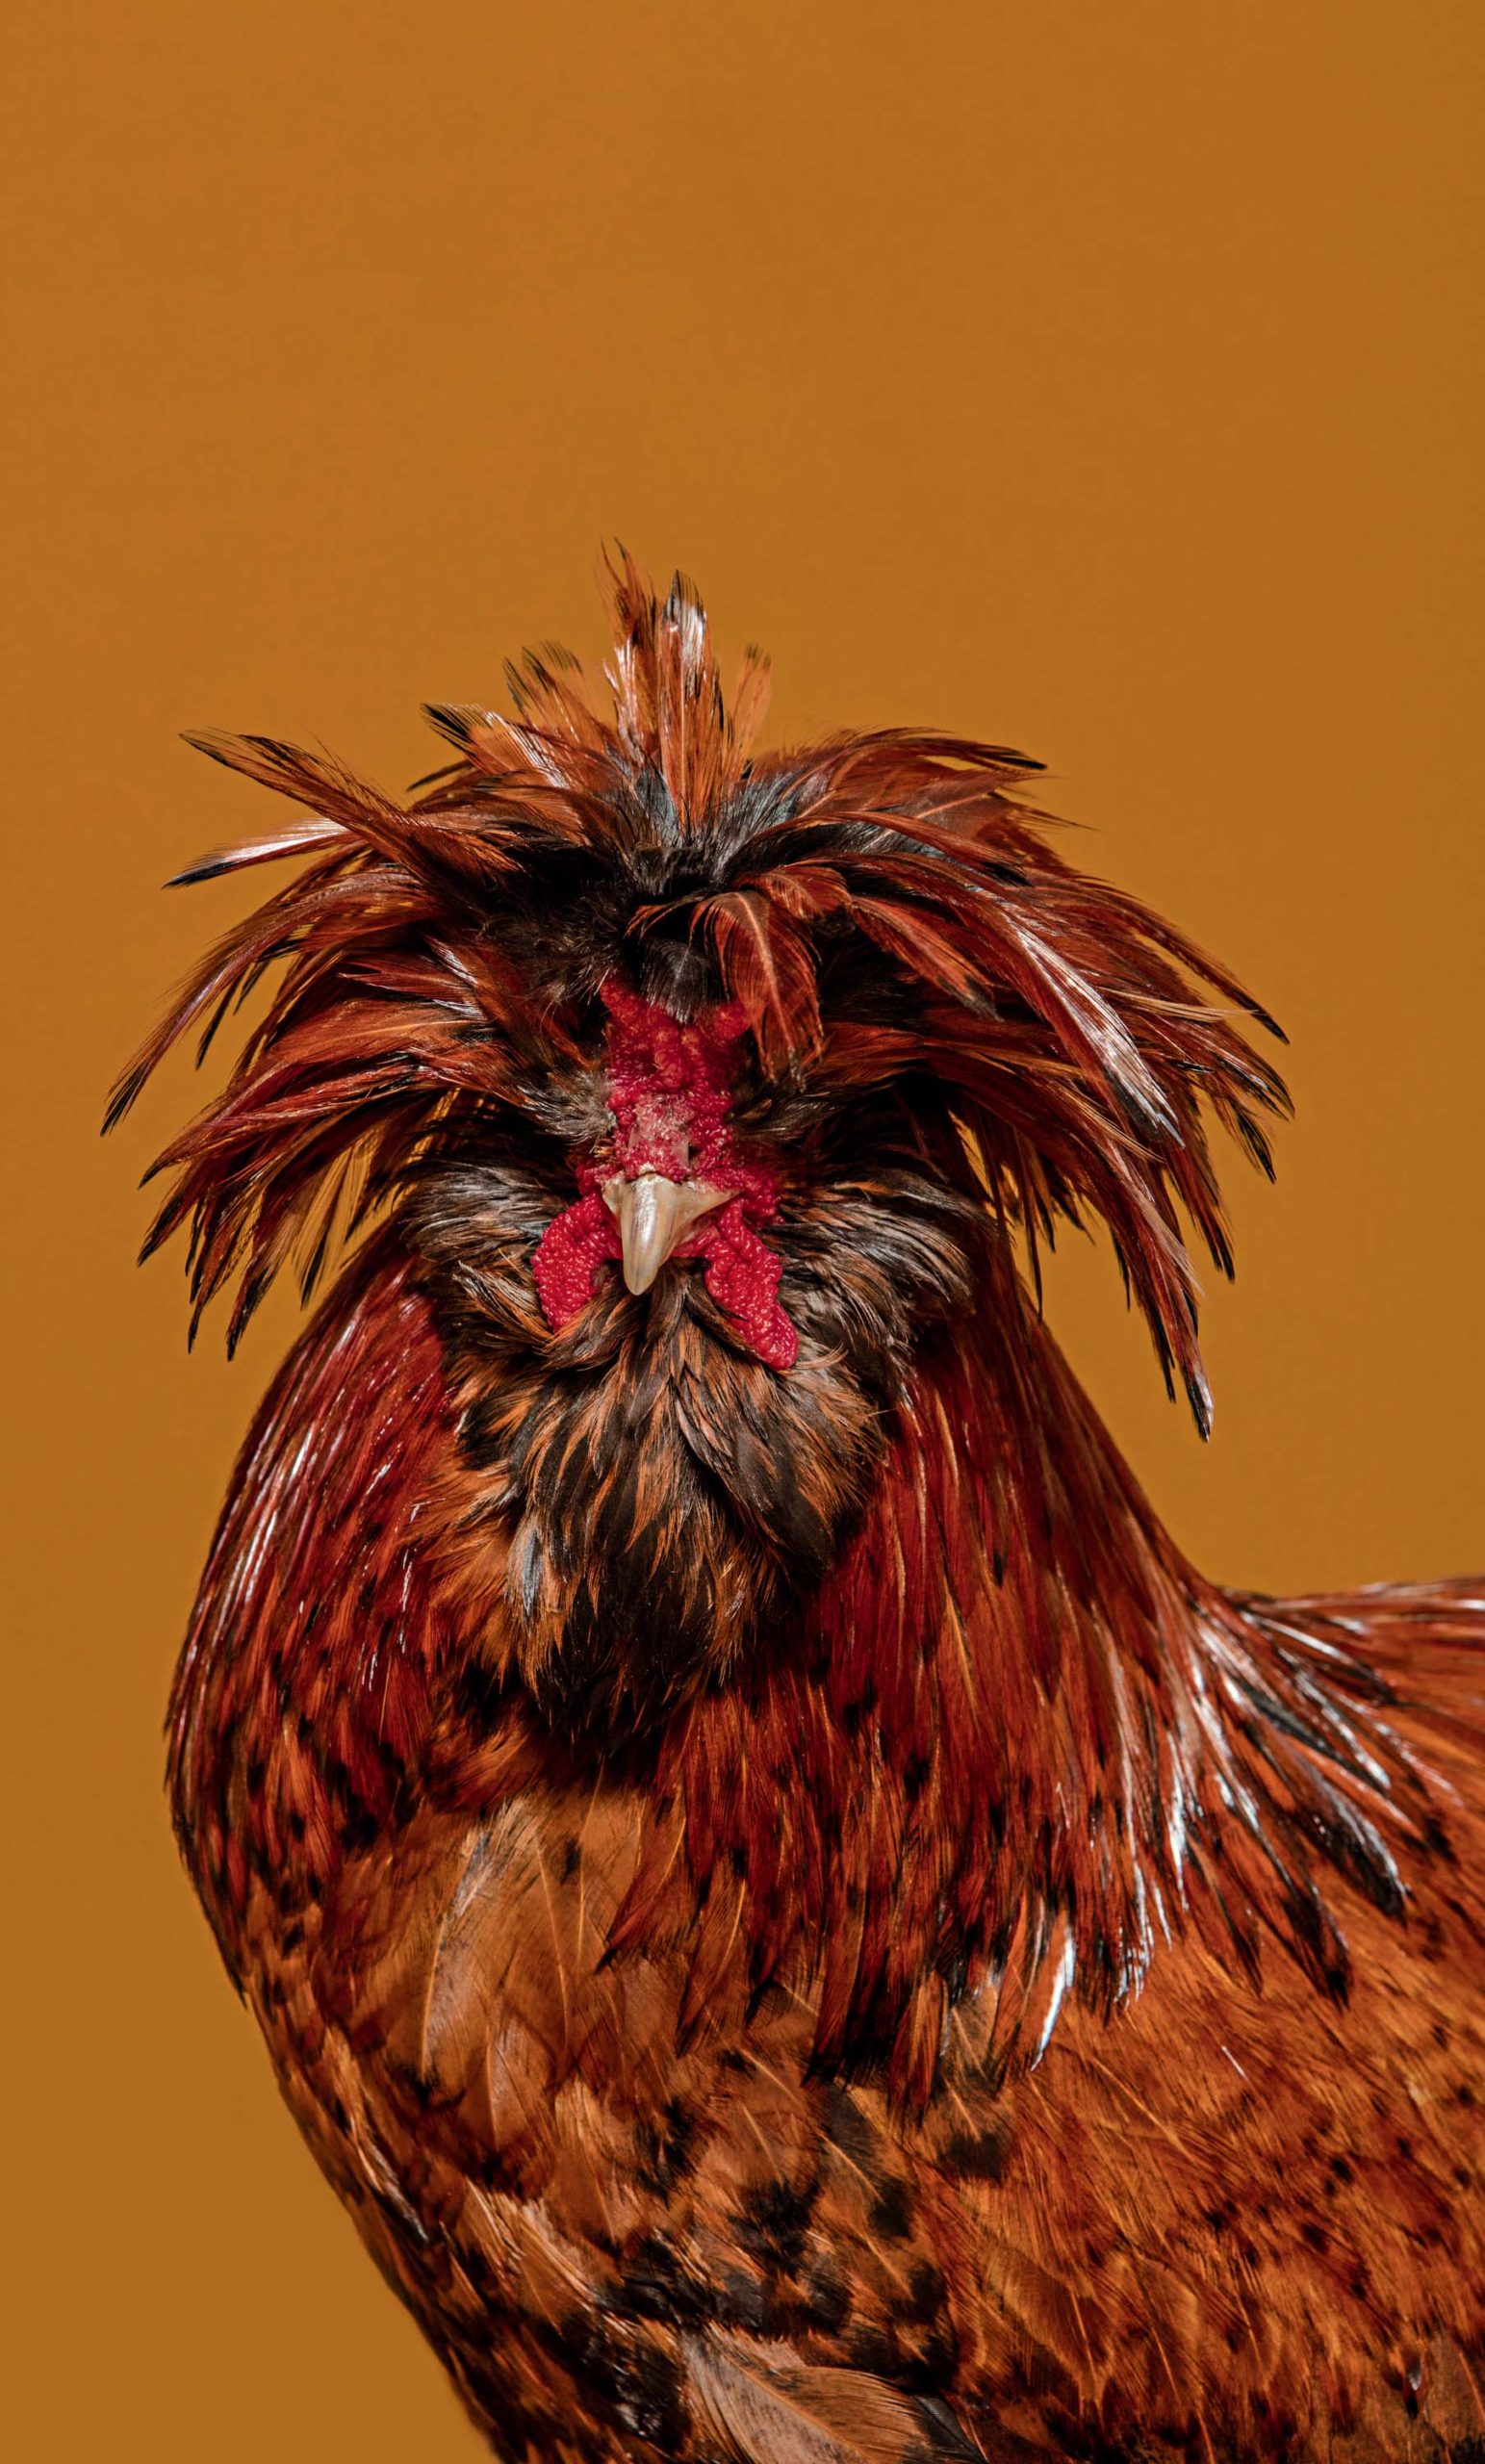 Why You Should Raise Rare Chicken Breeds